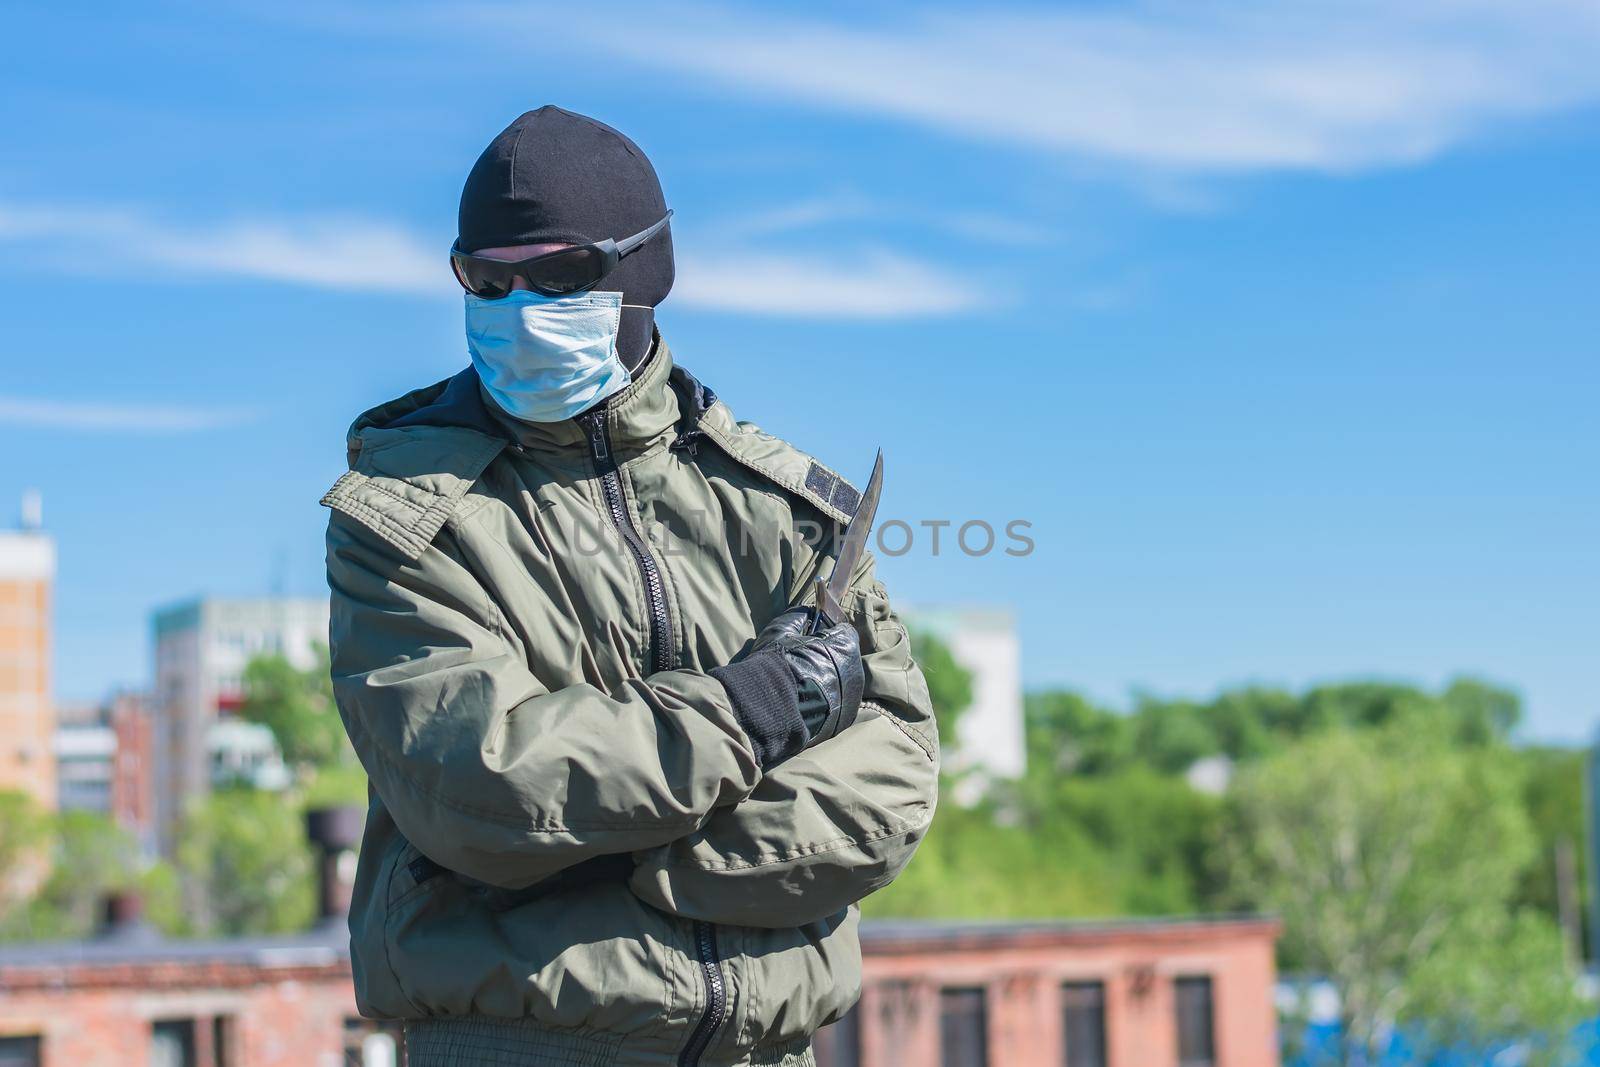 An intruder in a mask and with a weapon stands on the street